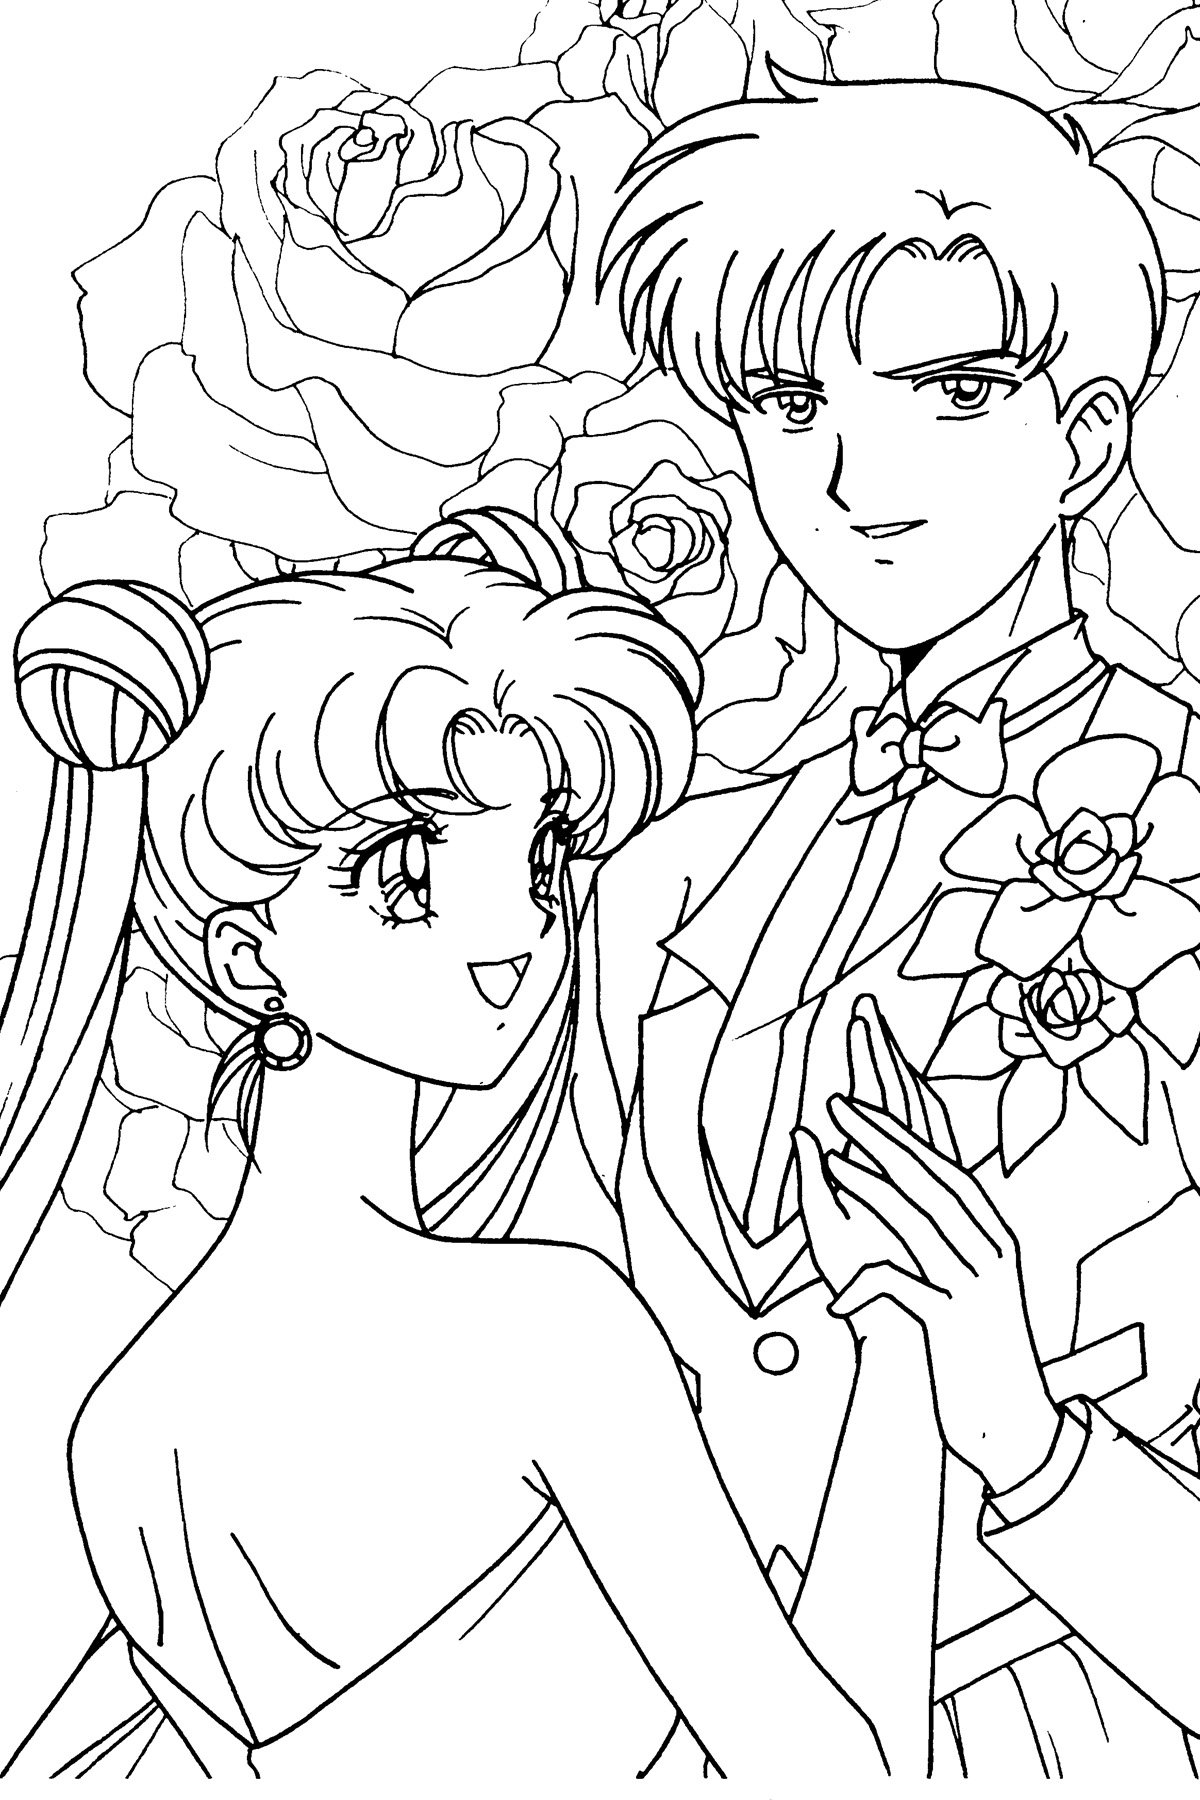 Sailor Moon Group Coloring Pages at GetDrawings Free download